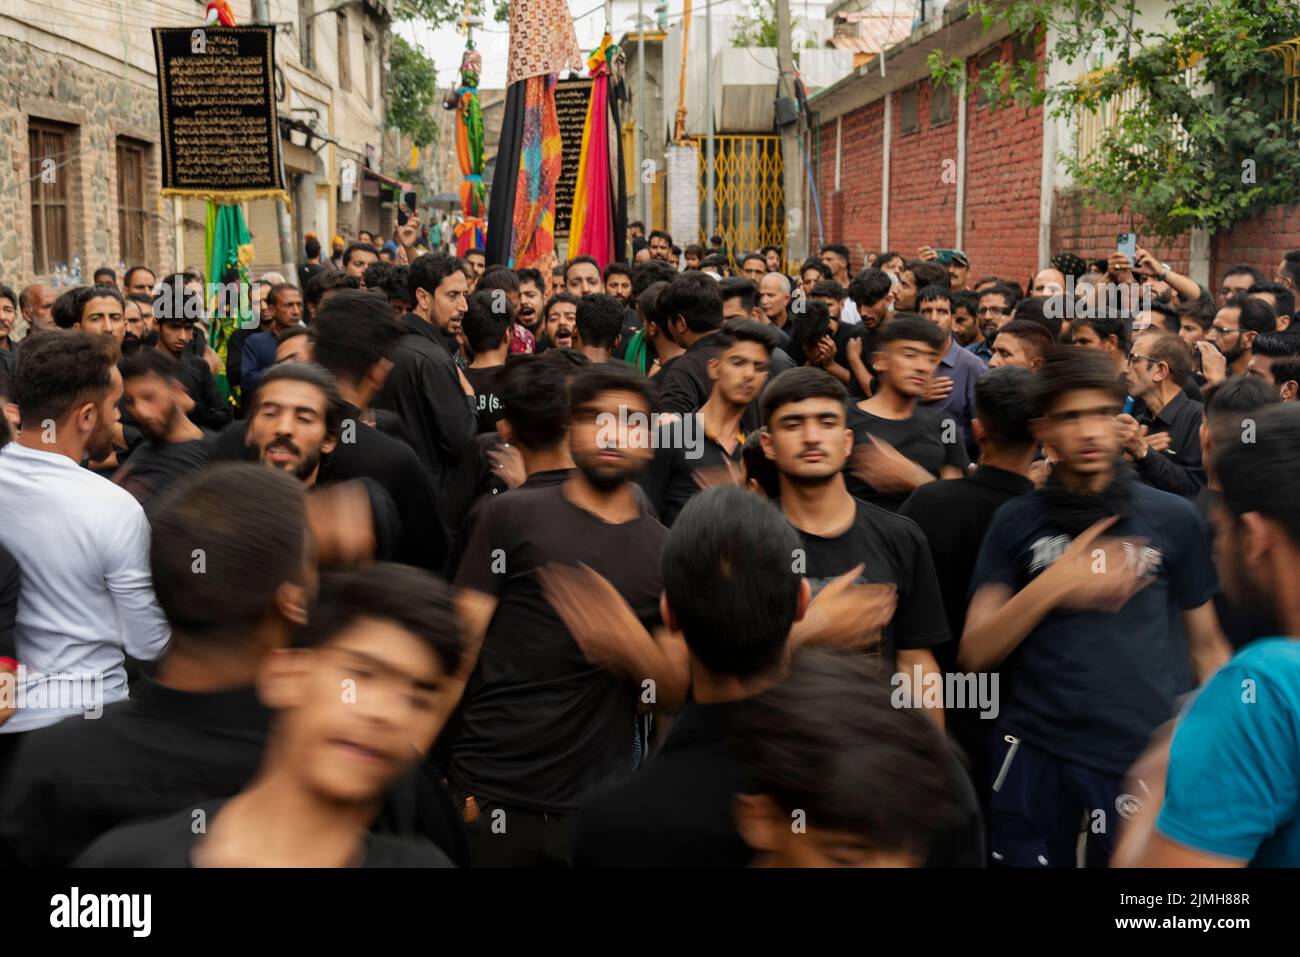 Shia Muslim mourners beat their chests during a religious procession on the 7th day of Muharram. Muharram is the first month of Islam. It is one of the holiest months on the Islamic calendar. Shia Muslims commemorate Muharram as a month of mourning in remembrance of the martyrdom of the Islamic Prophet Muhammad's grandson Imam Hussain, who was killed on Ashura (10th day of Muharram) in the battle of Karbala in 680 A.D. Stock Photo